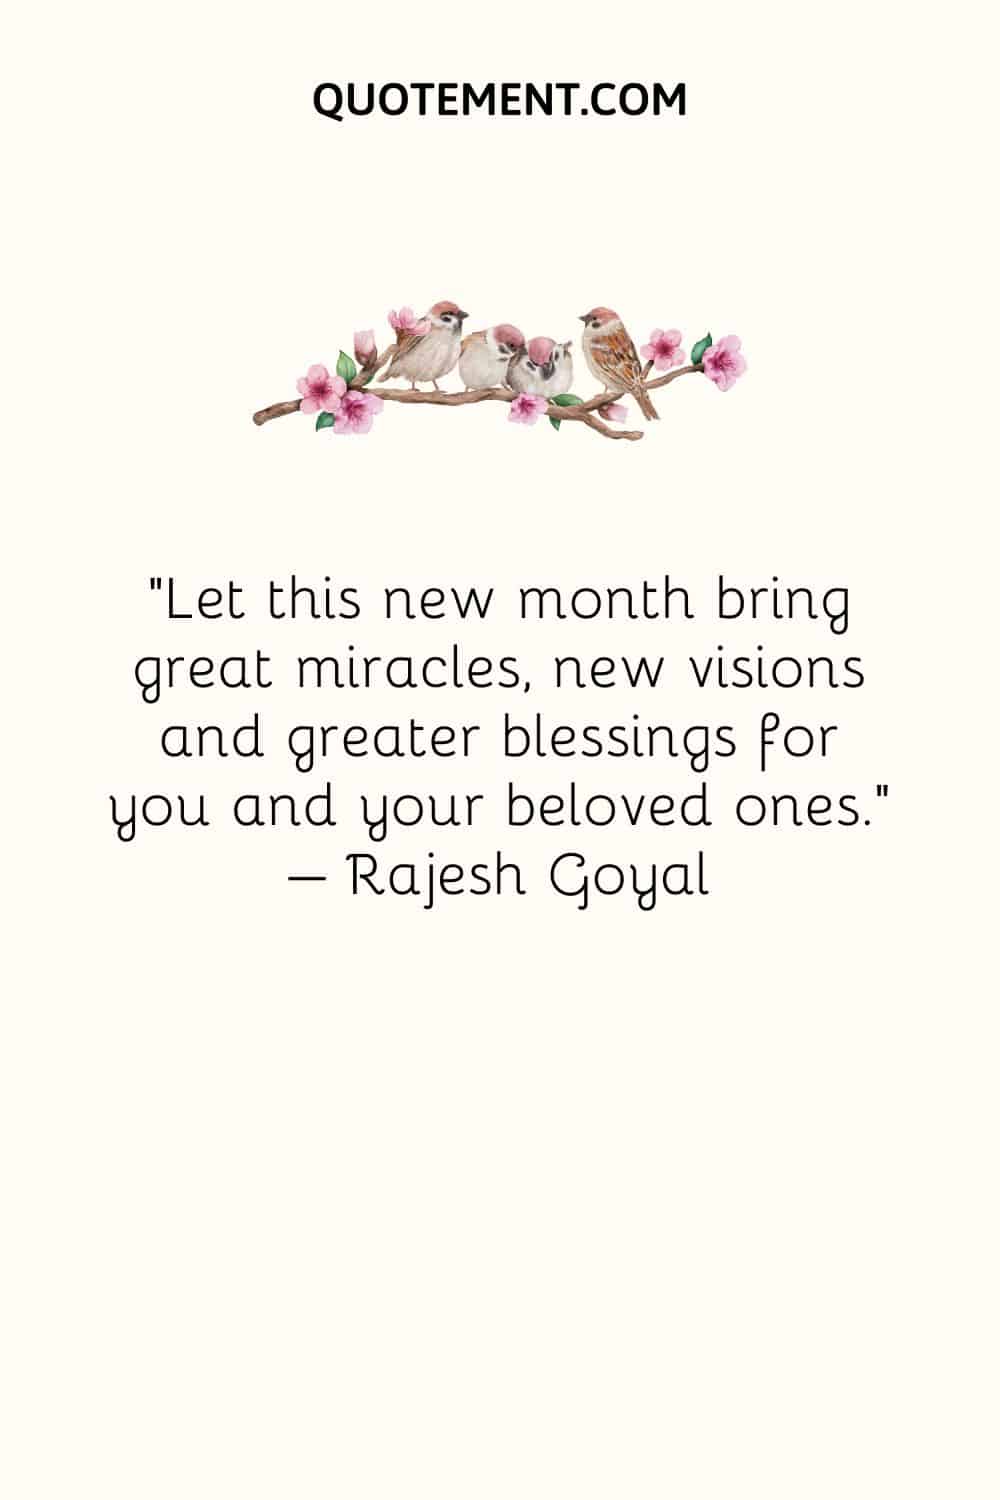 Let this new month bring great miracles, new visions and greater blessings for you and your beloved ones. – Rajesh Goyal